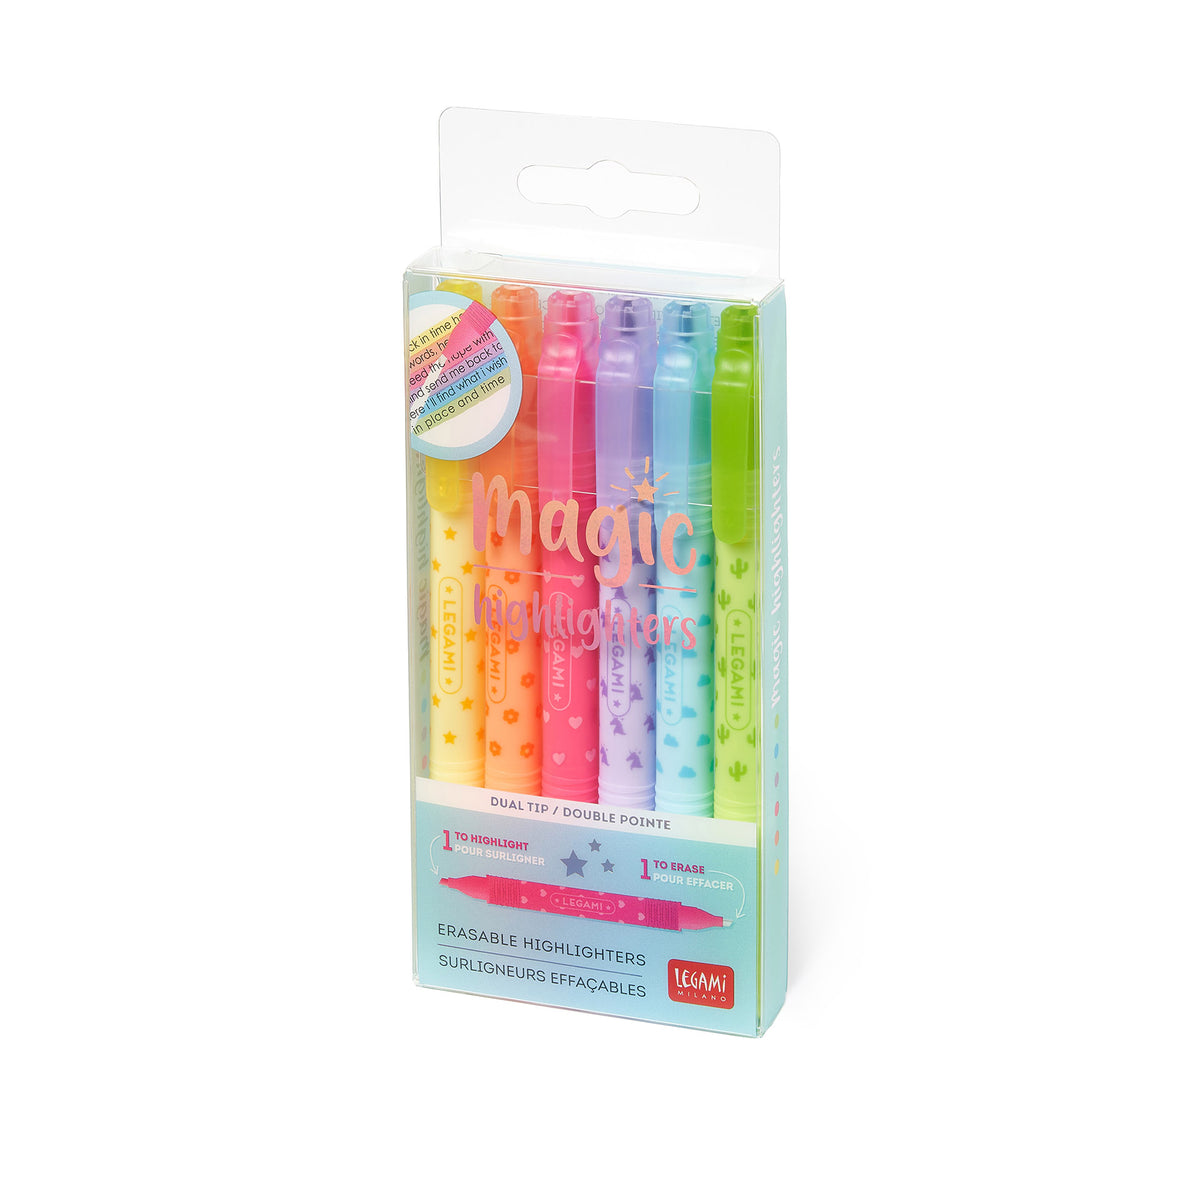 An image of the retail packaging for 6 erasable magic mini highlighters.